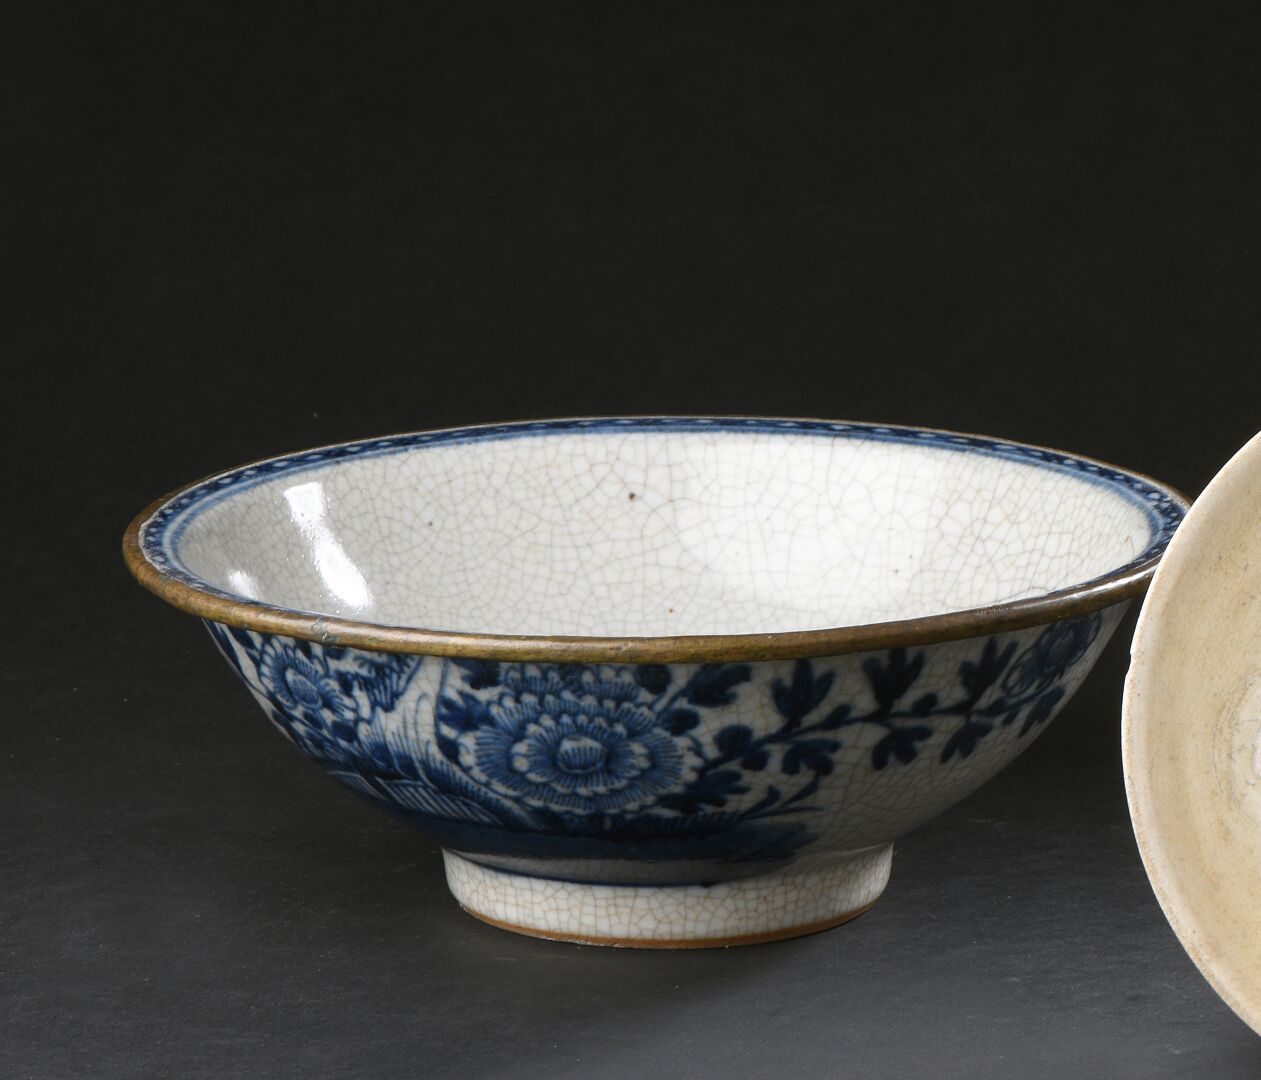 Null Large blue and white porcelain bowl
Vietnam, 19th century
Decorated with pe&hellip;